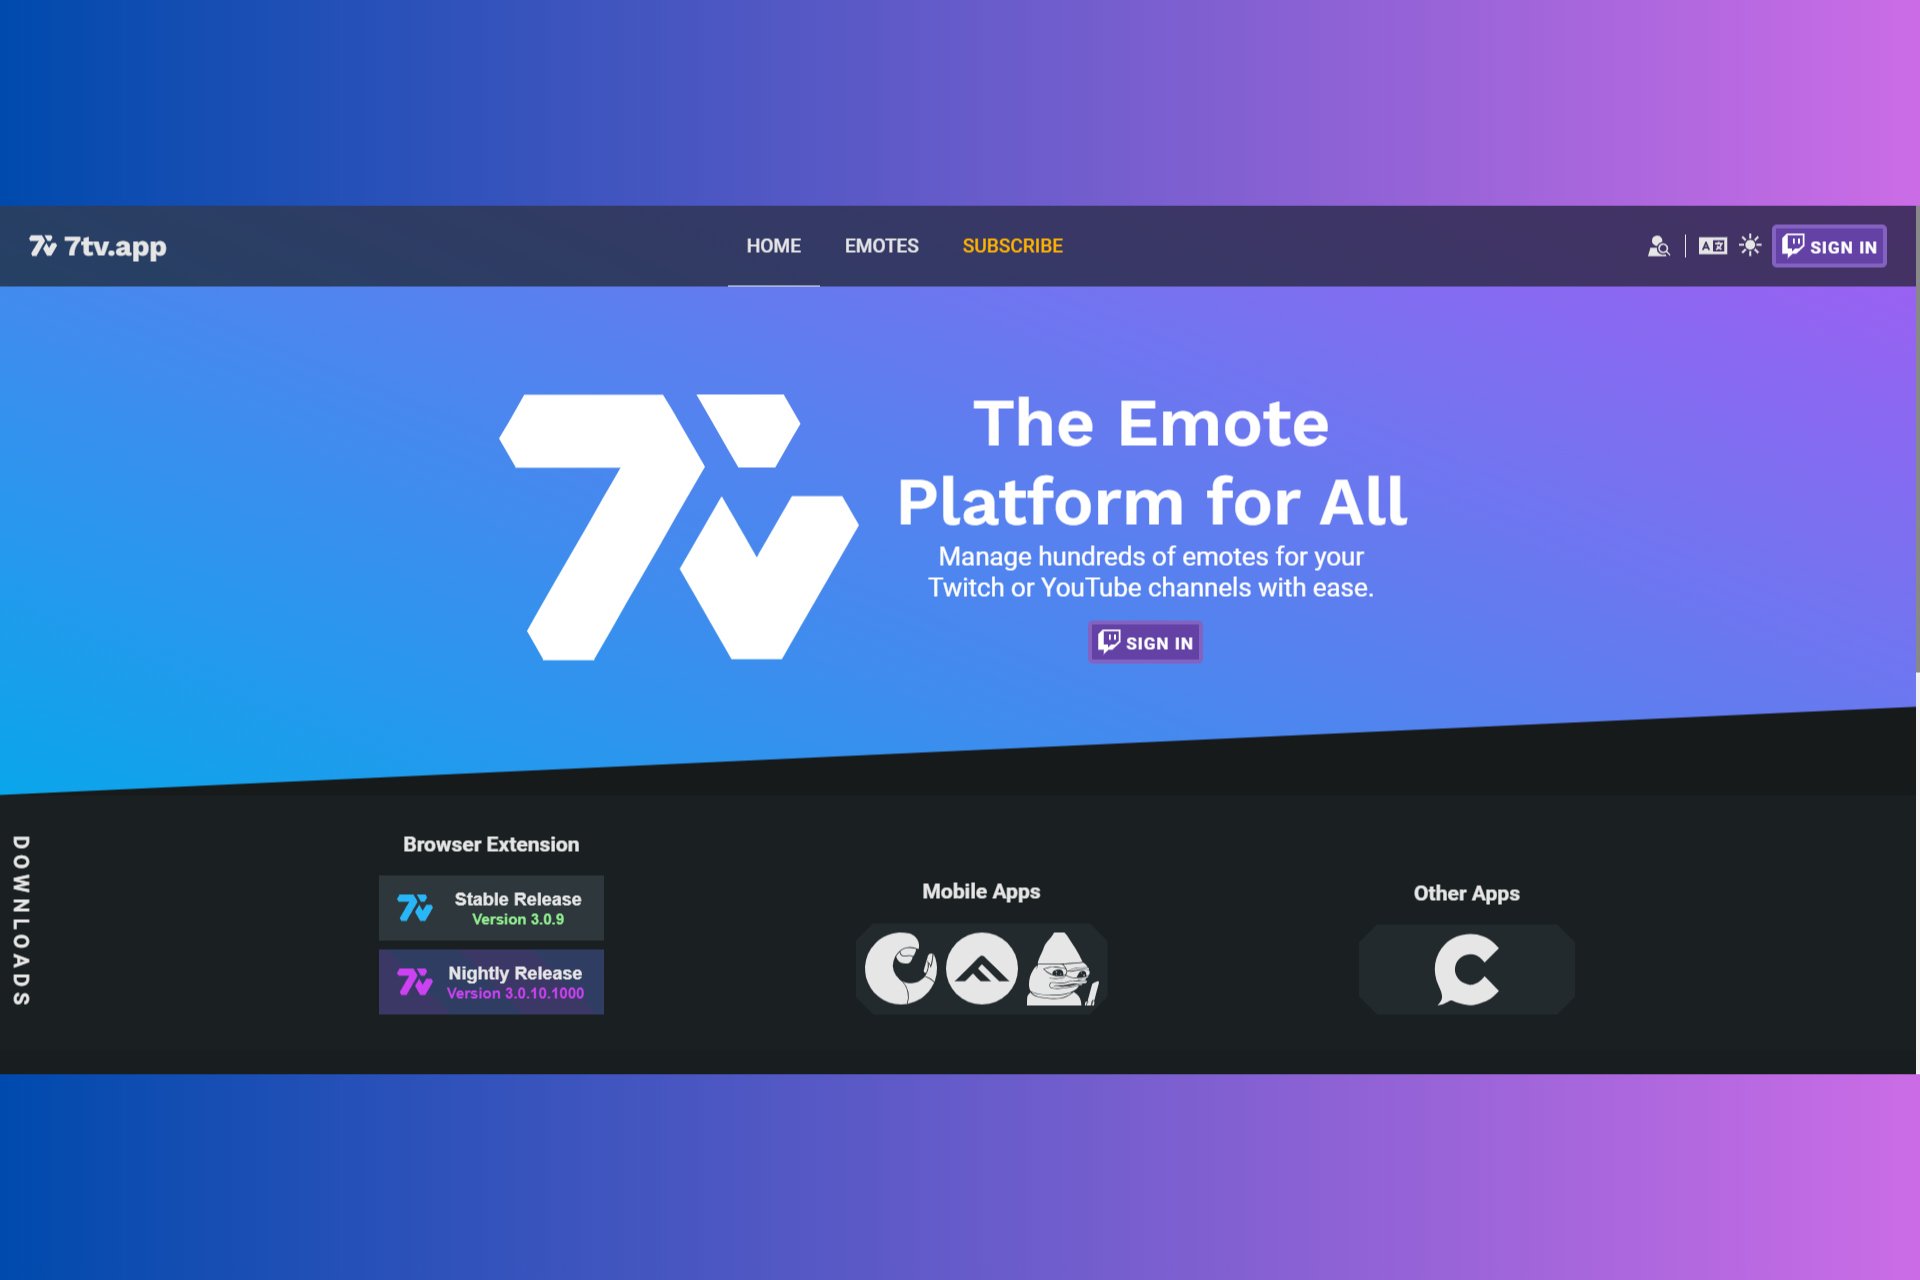 How to install the 7TV Extension in Firefox